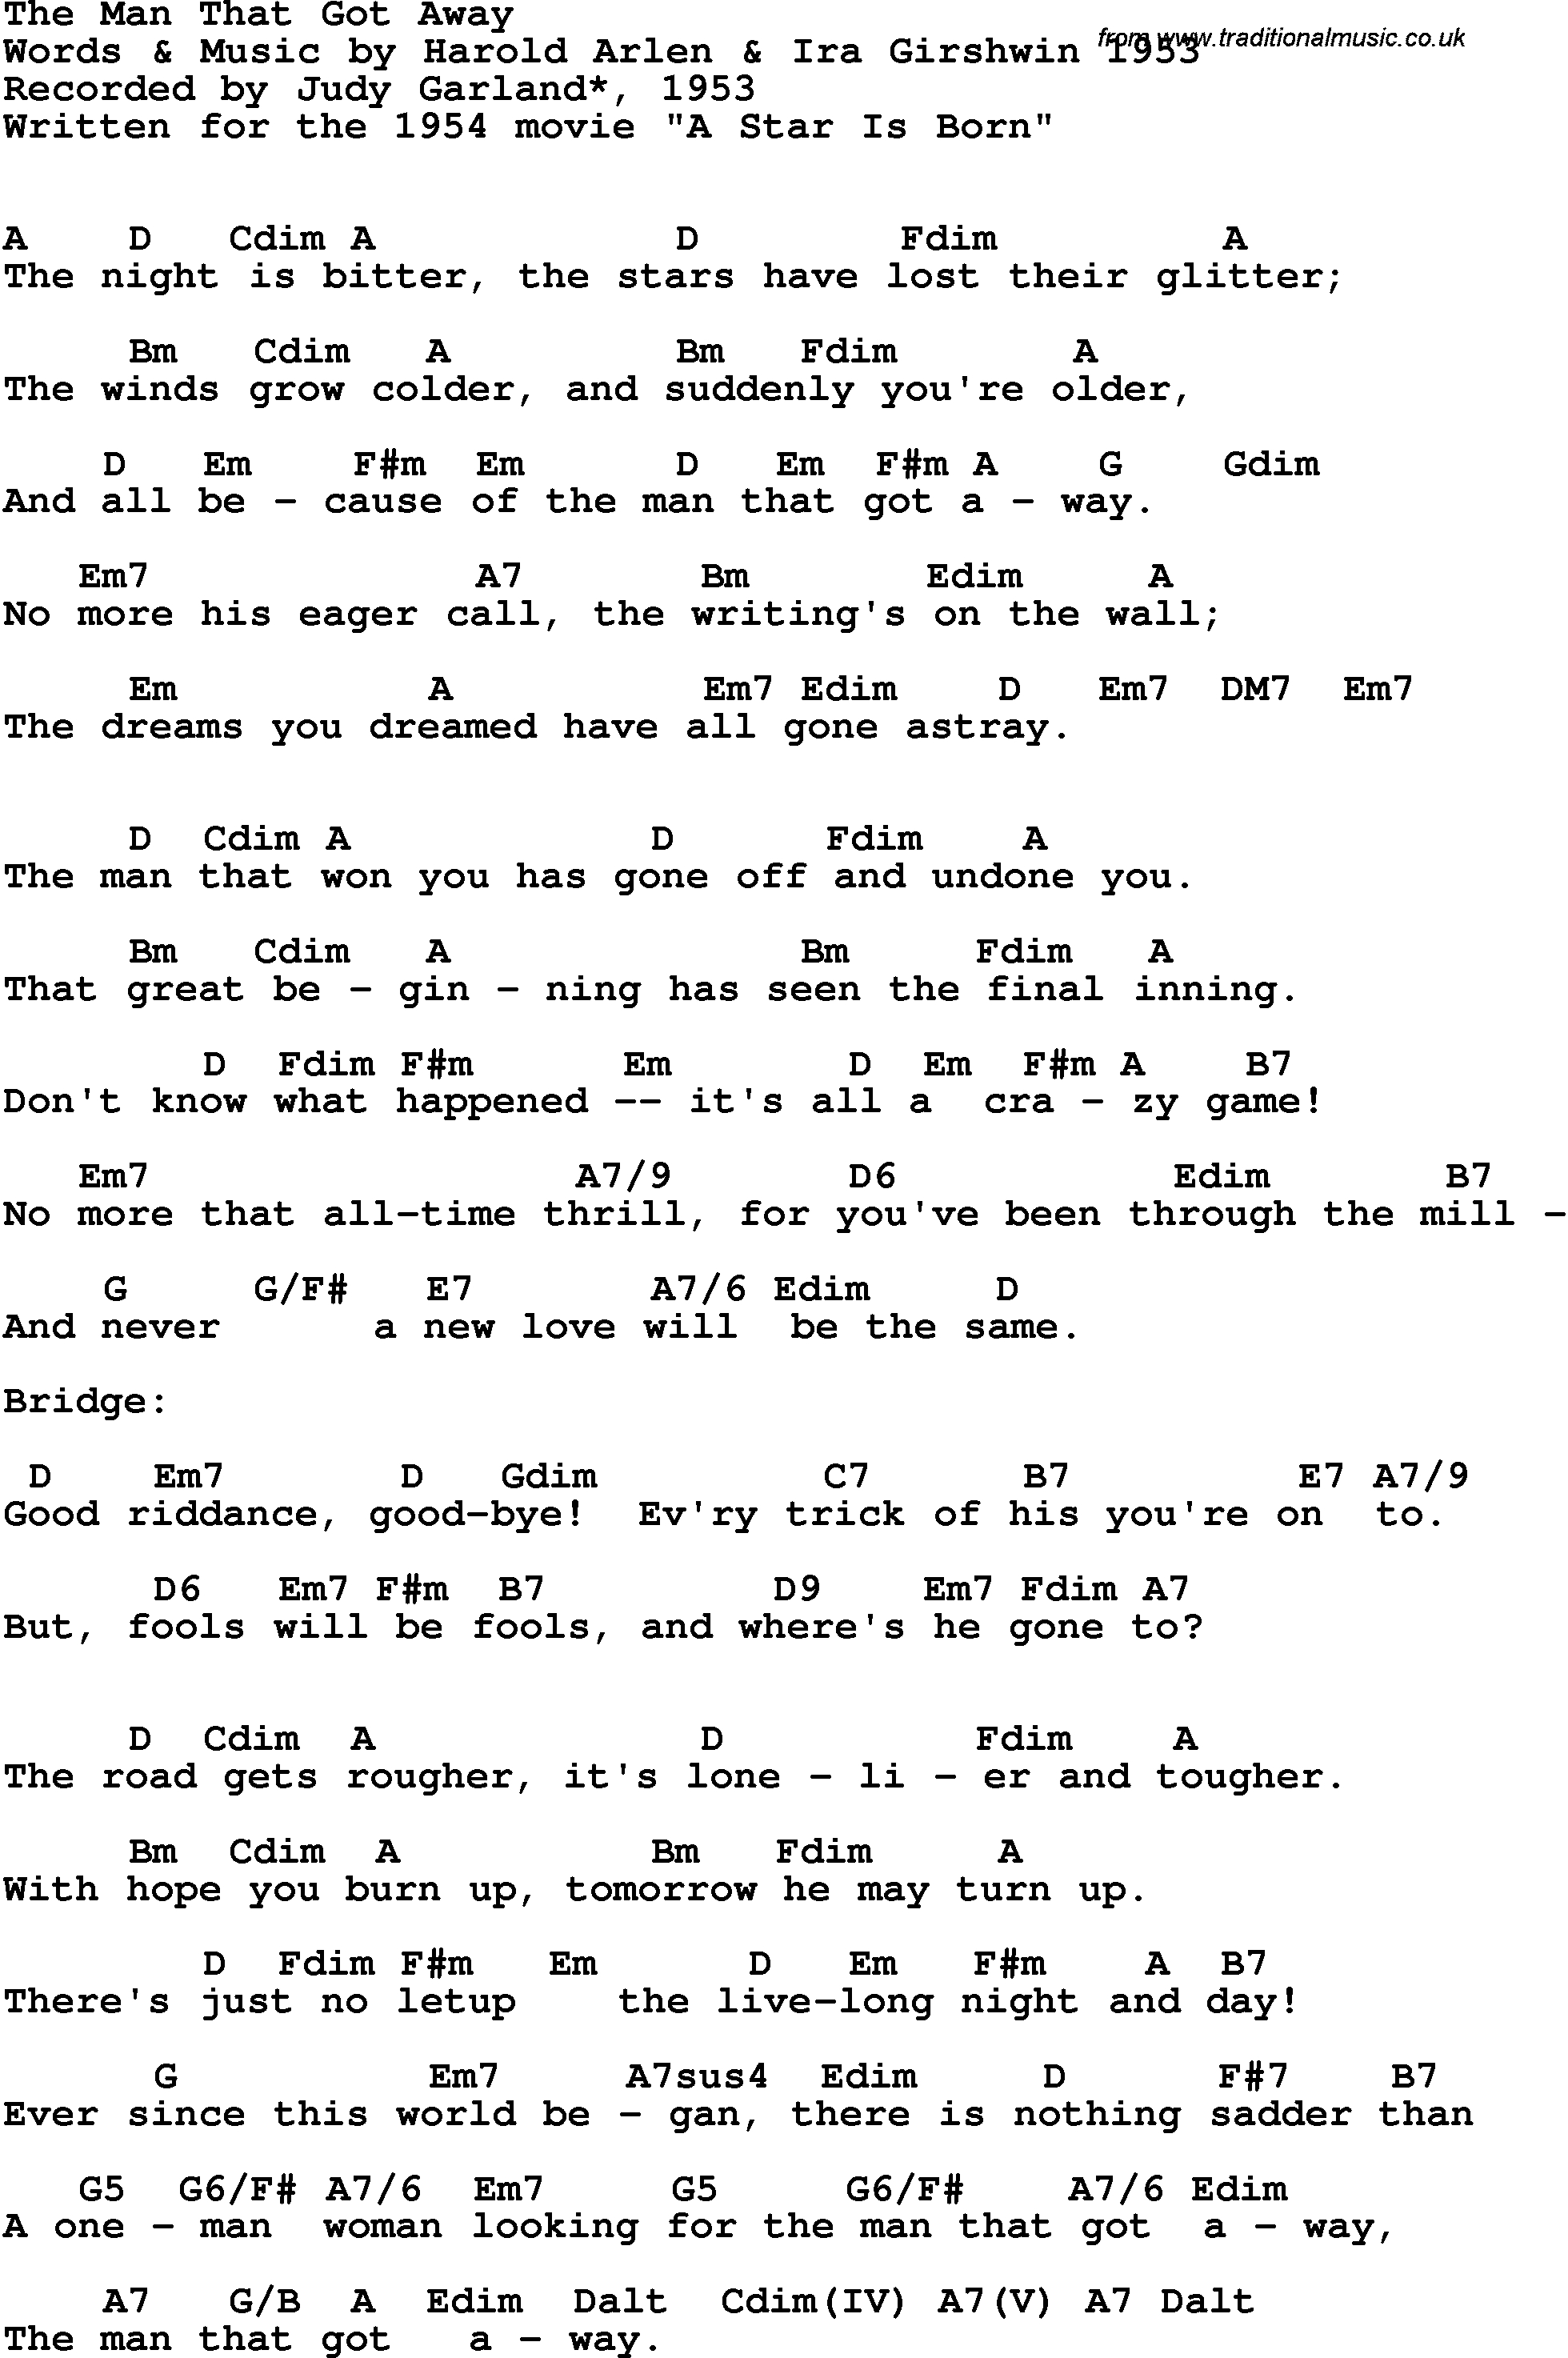 Good Riddance Chords Song Lyrics With Guitar Chords For Man That Got Away The Judy